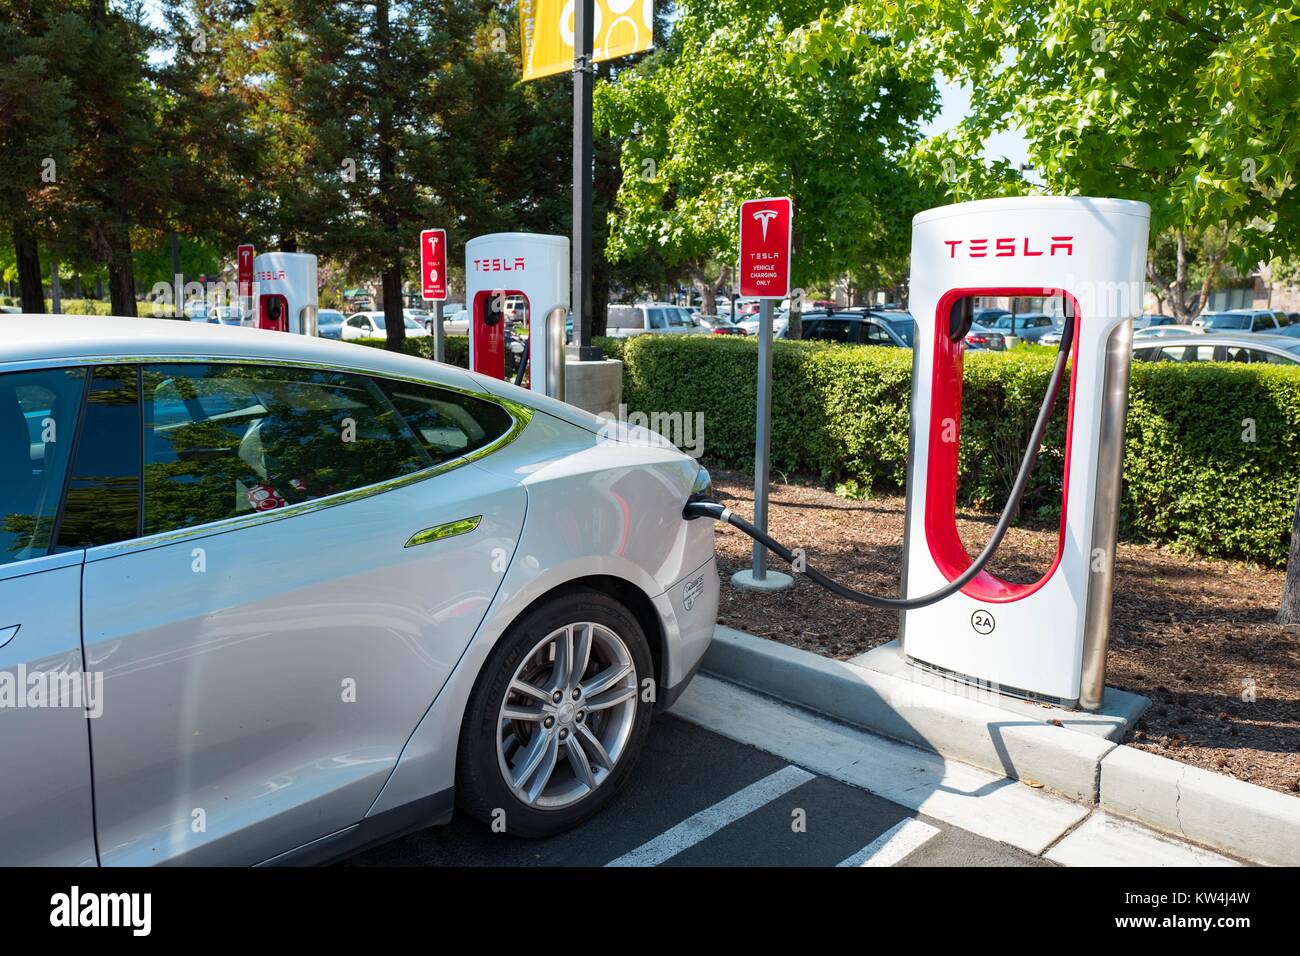 Tesla automobile plugged in and charging a Supercharger rapid battery  charging station for the electric vehicle company Tesla Motors, in the  Silicon Valley town of Mountain View, California, August 24, 2016 Stock